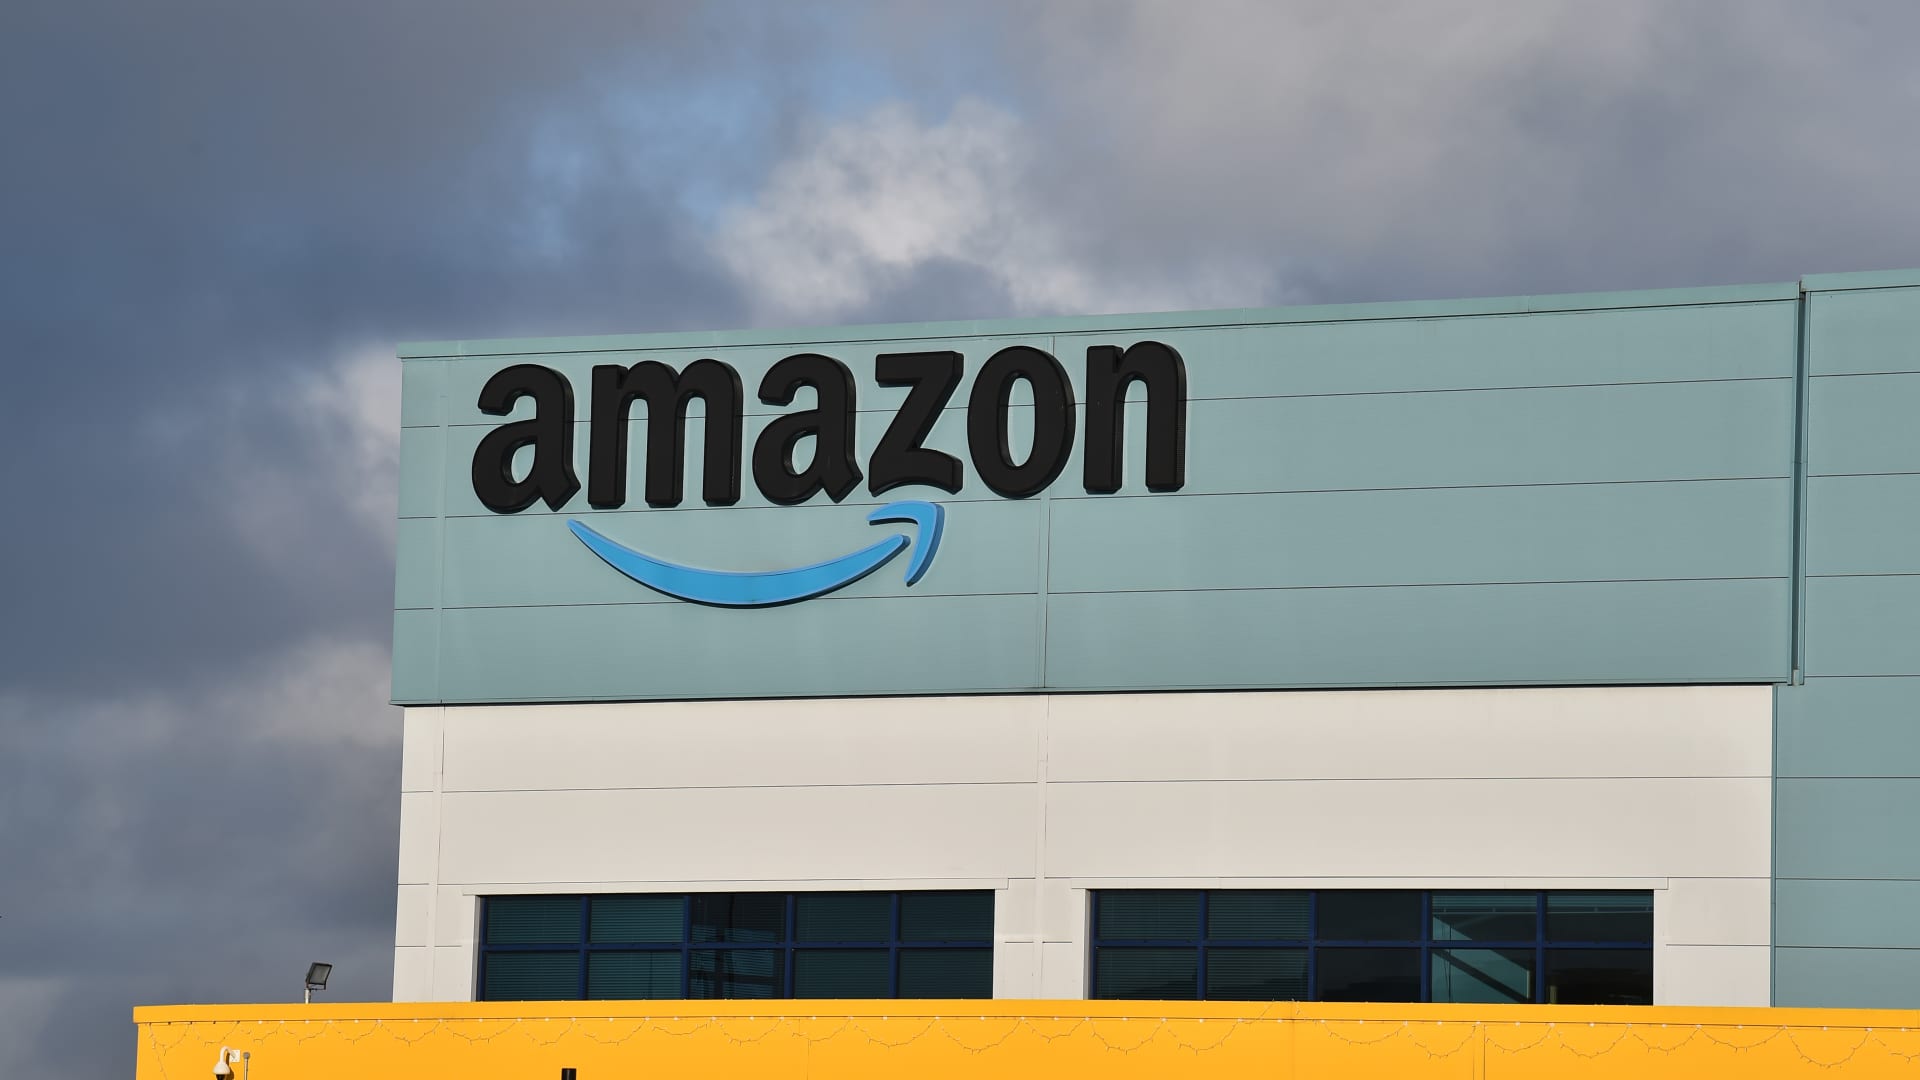 Amazon faces class action lawsuit in the UK over antitrust claims